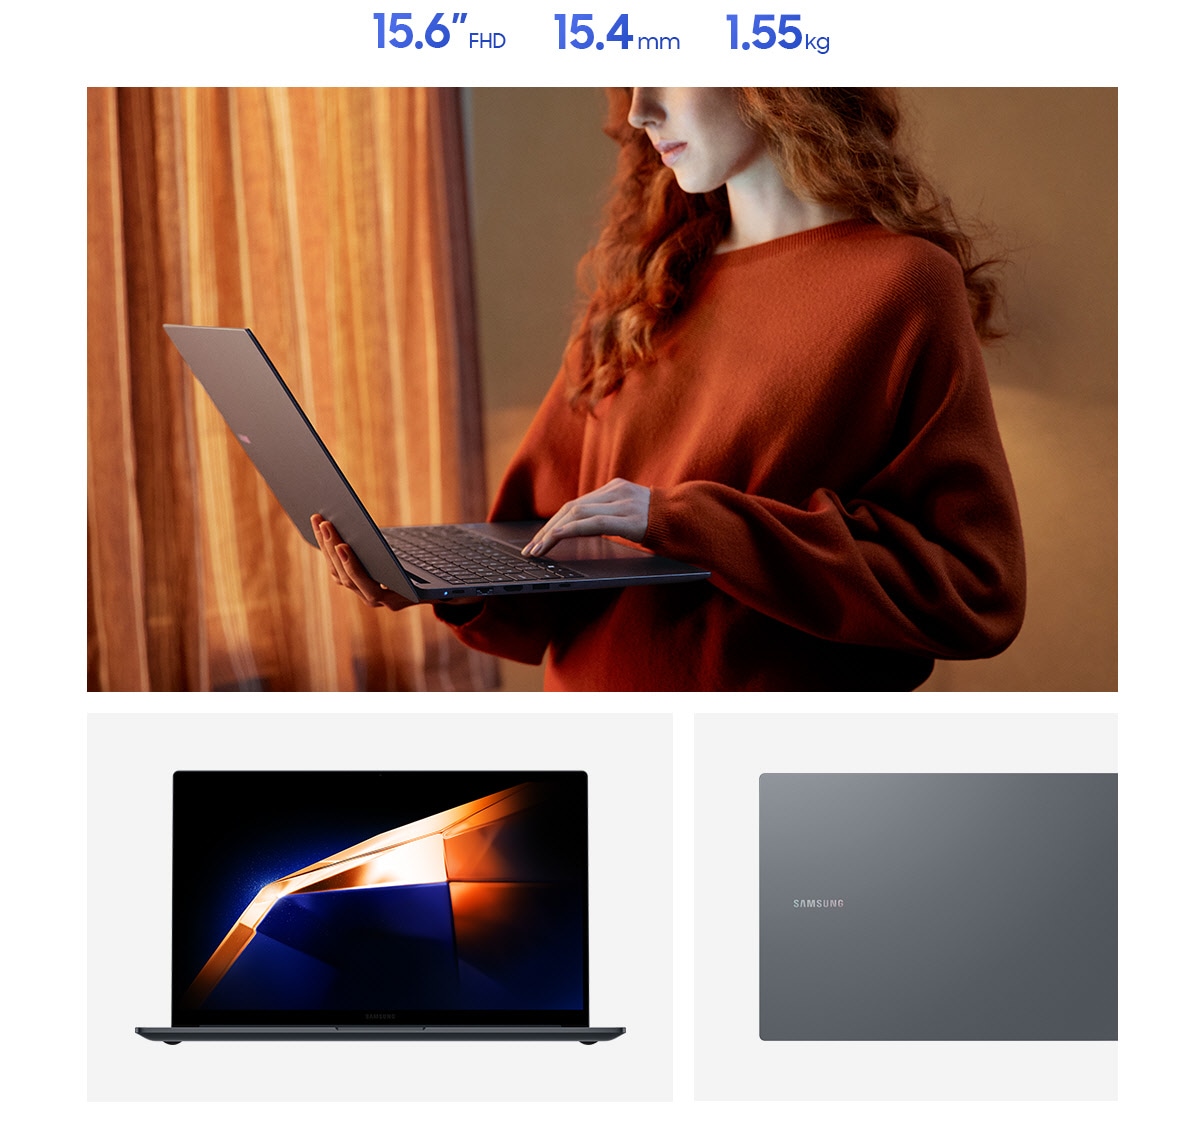 A young woman standing indoors is holding Galaxy Book4 open while typing on the laptop keyboard. Galaxy Book4 in Gray is open, facing forward with a dark blue and orange wallpaper onscreen. Close-up view of the Samsung logo on the cover of Galaxy Book4 in Gray. Galaxy Book4 has thickness of 15.4mm, weighs 1.55kg and features a 15.6 FHD display.